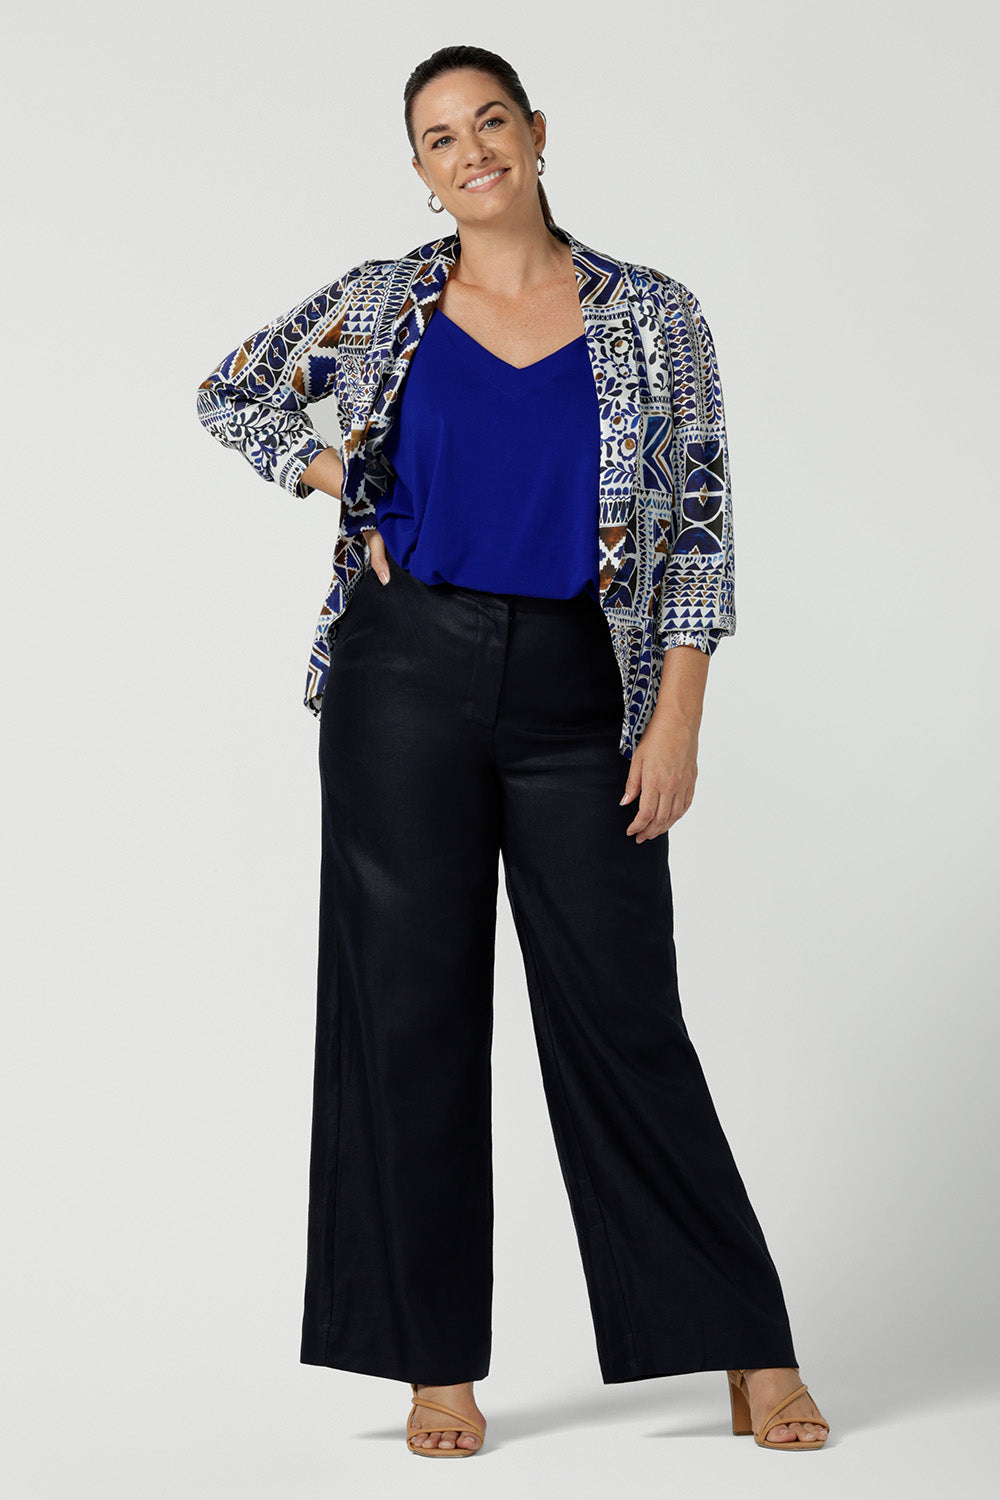 A curvy size 12 woman wears a soft tailoring summer blazer in printed Italian Viscose fabric. A breathable, lightweight women's jacket that's perfect for summer, this Mediterranean-inspired blazer worn with tailored linen pants in midnight blue and cobalt blue bamboo jersey cami  top - all made in Australia by Australian and New Zealand women's clothes brand, Leina & Fleur.